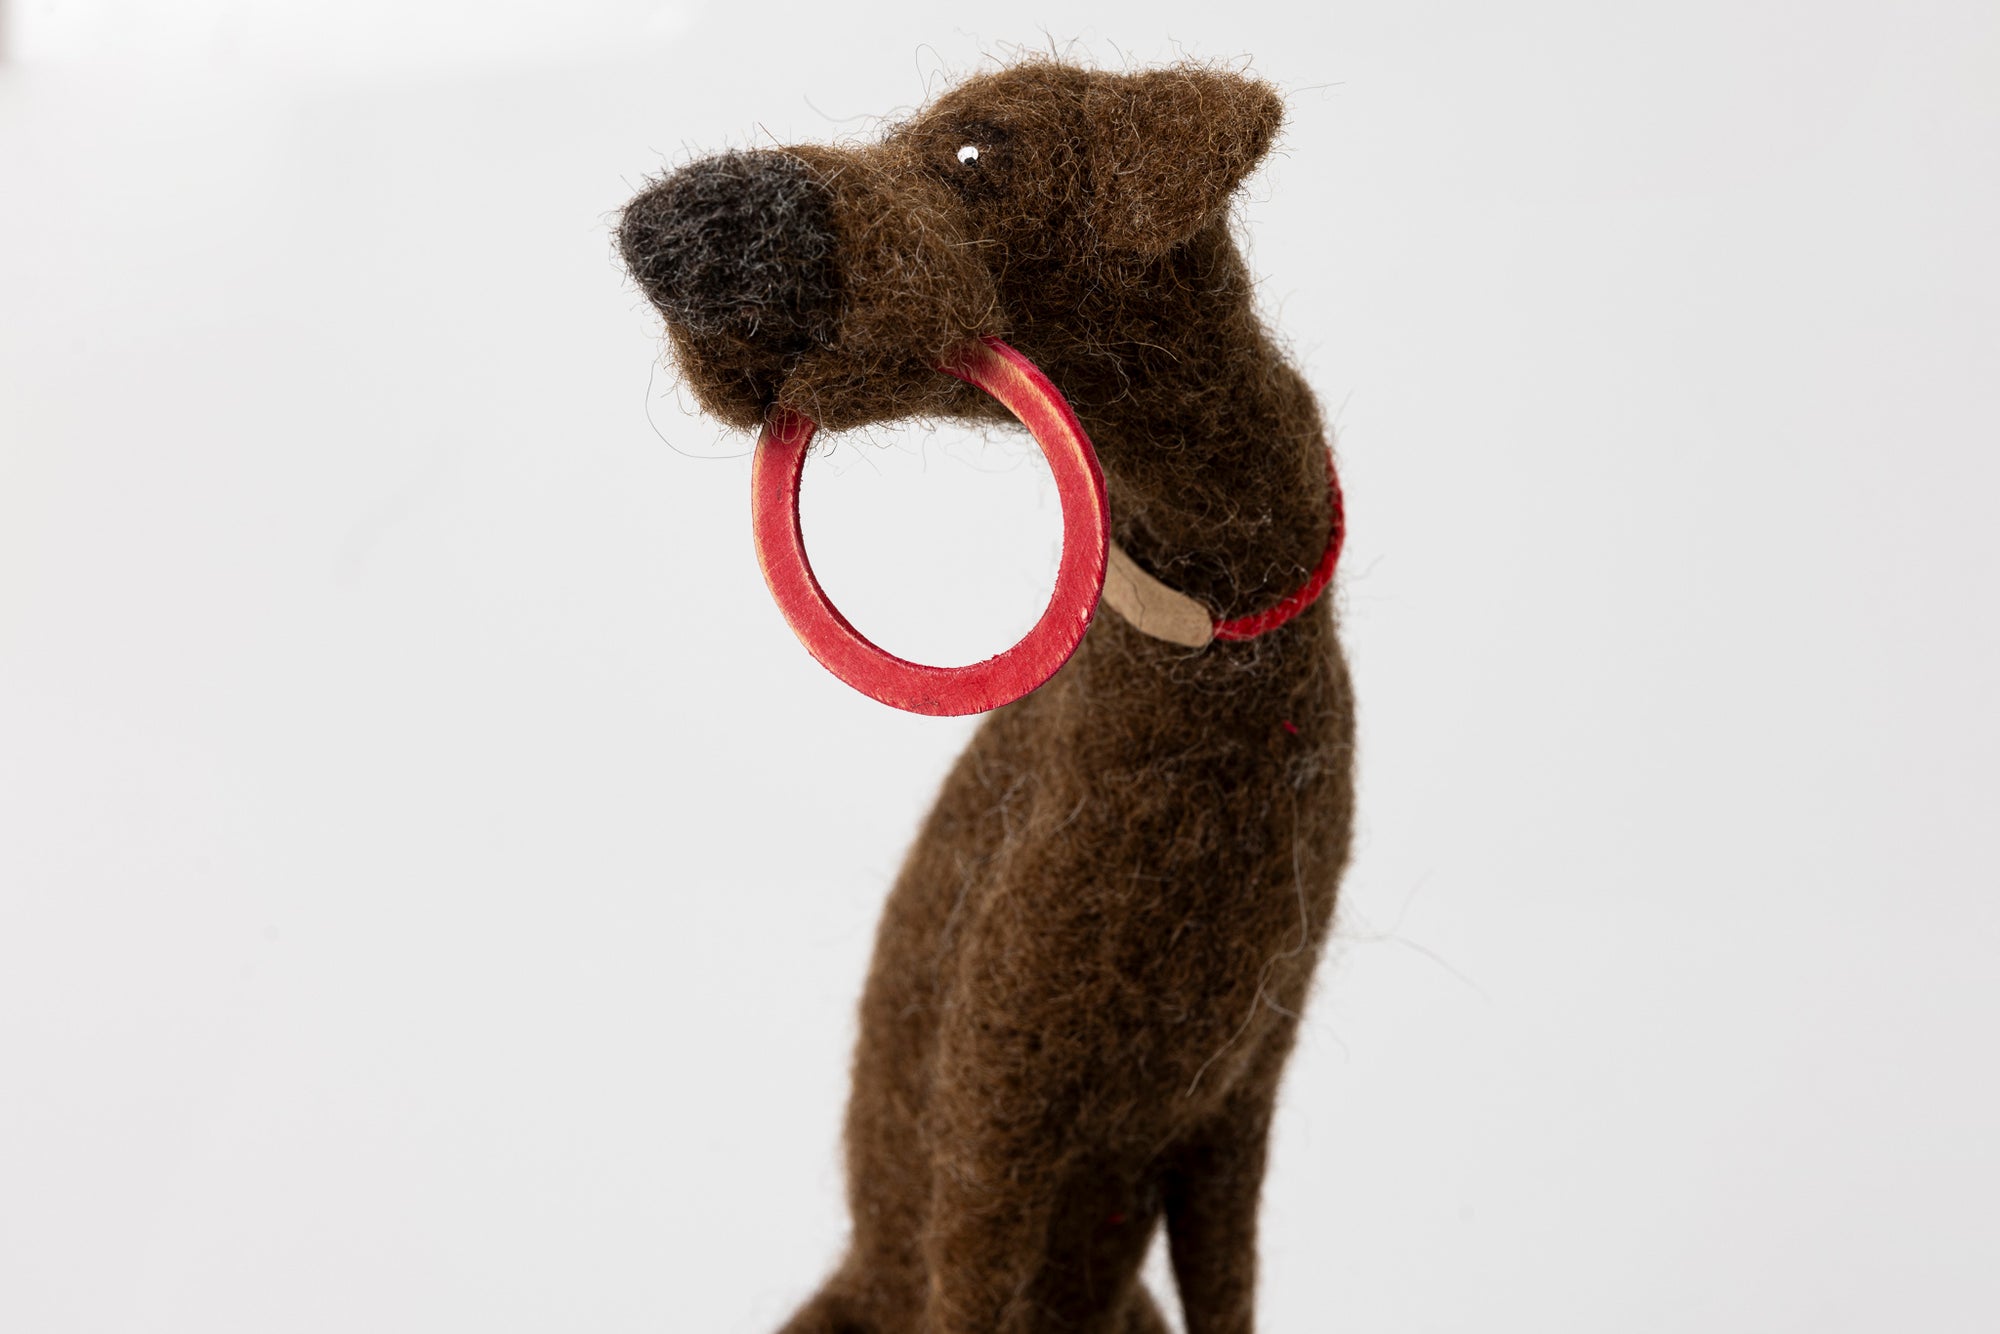 'Tina' needlefelt character dog by Kate Toms, available at Padstow Gallery, Cornwall